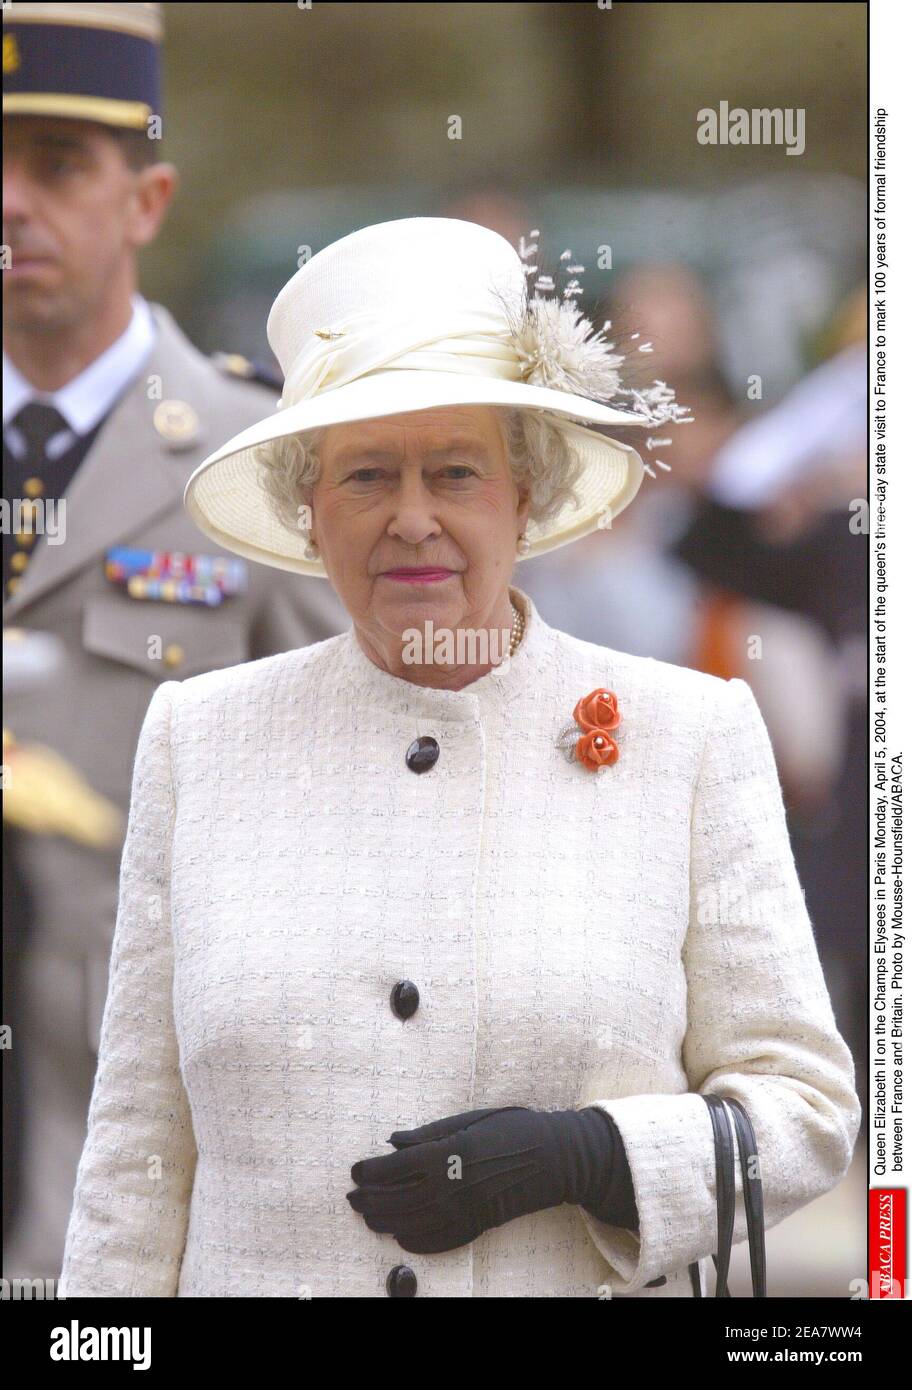 Britian's Queen Elizabeth II on the Champs Elysees in Paris Monday, April 5, 2004, at the start of the queen's three-day state visit to France to mark 100 years of formal friendship between France and Britain. Photo by Mousse-Hounsfield/ABACA. Stock Photo